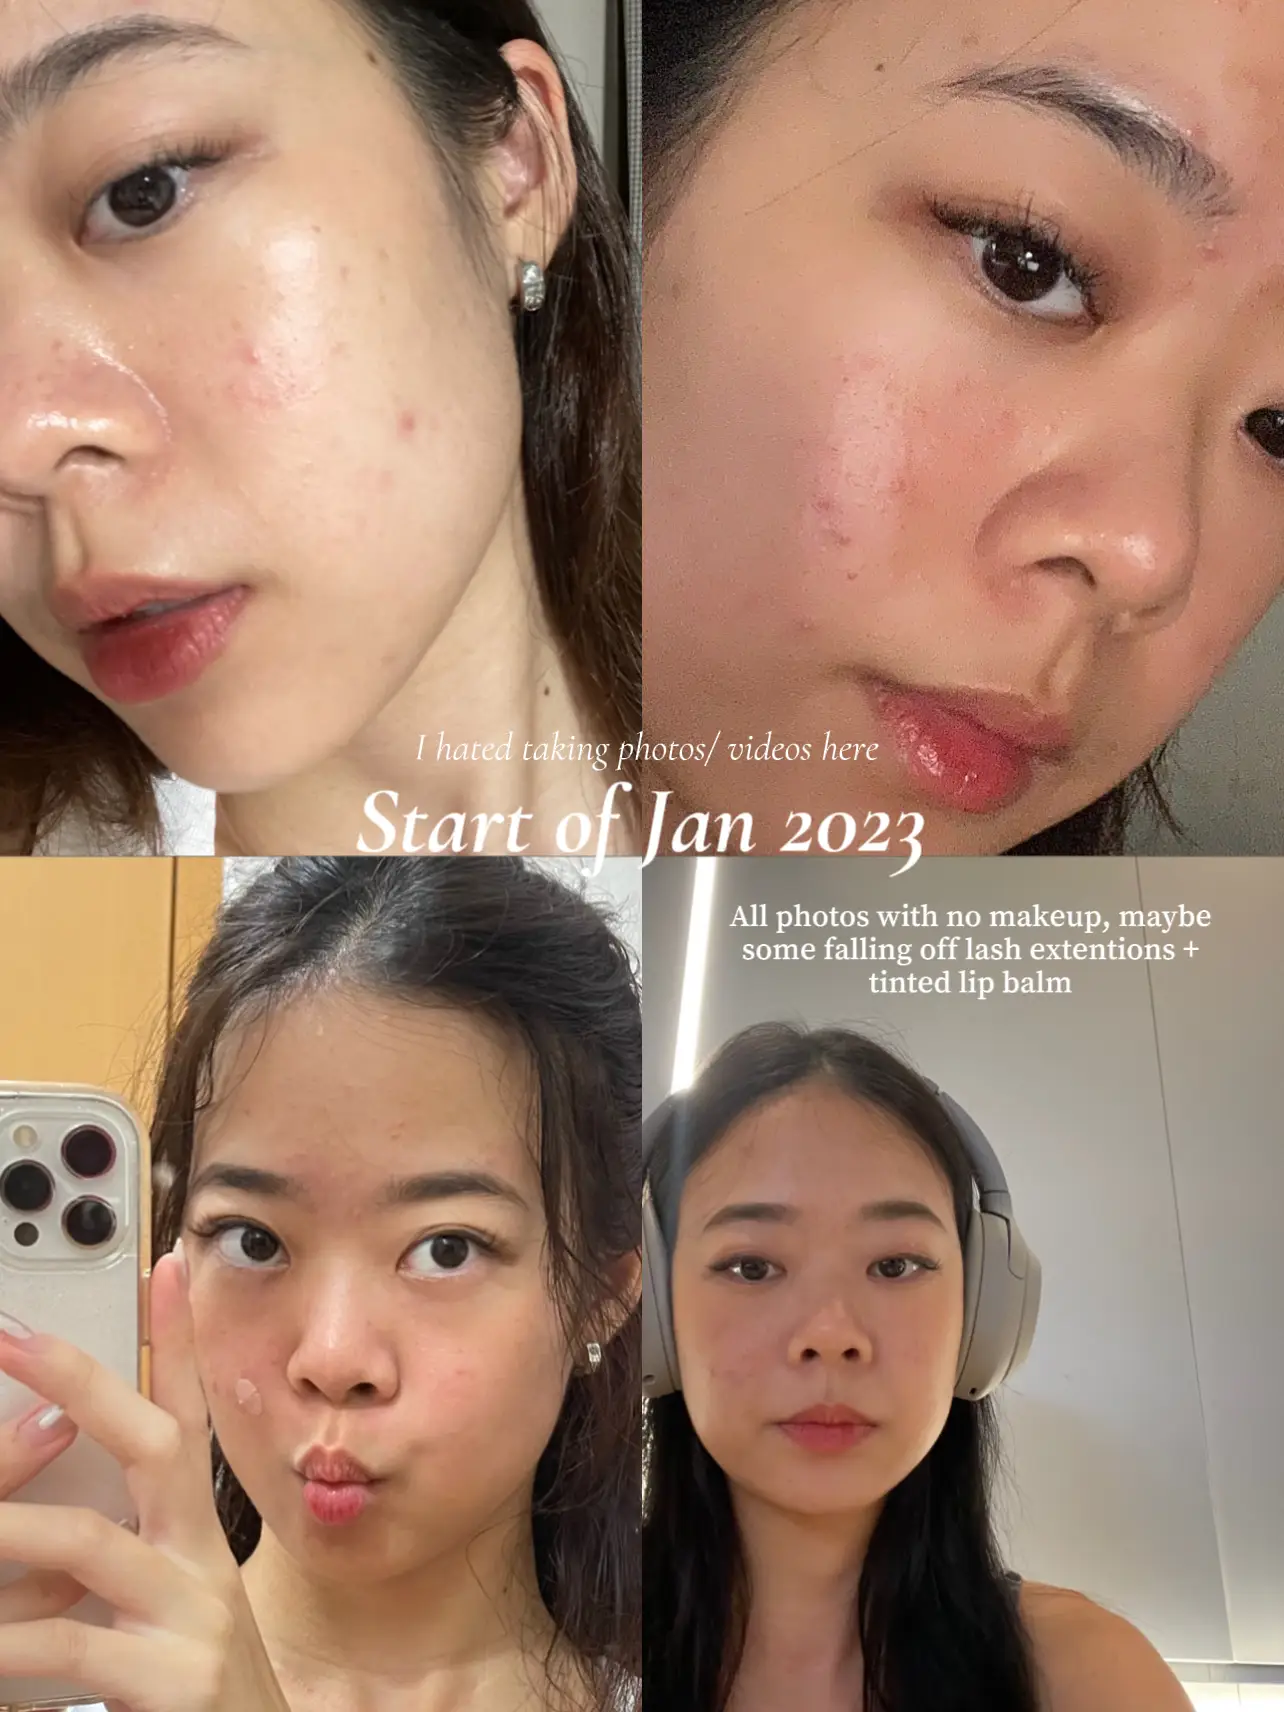 I finally cleared up my acne... 😭🧿's images(1)